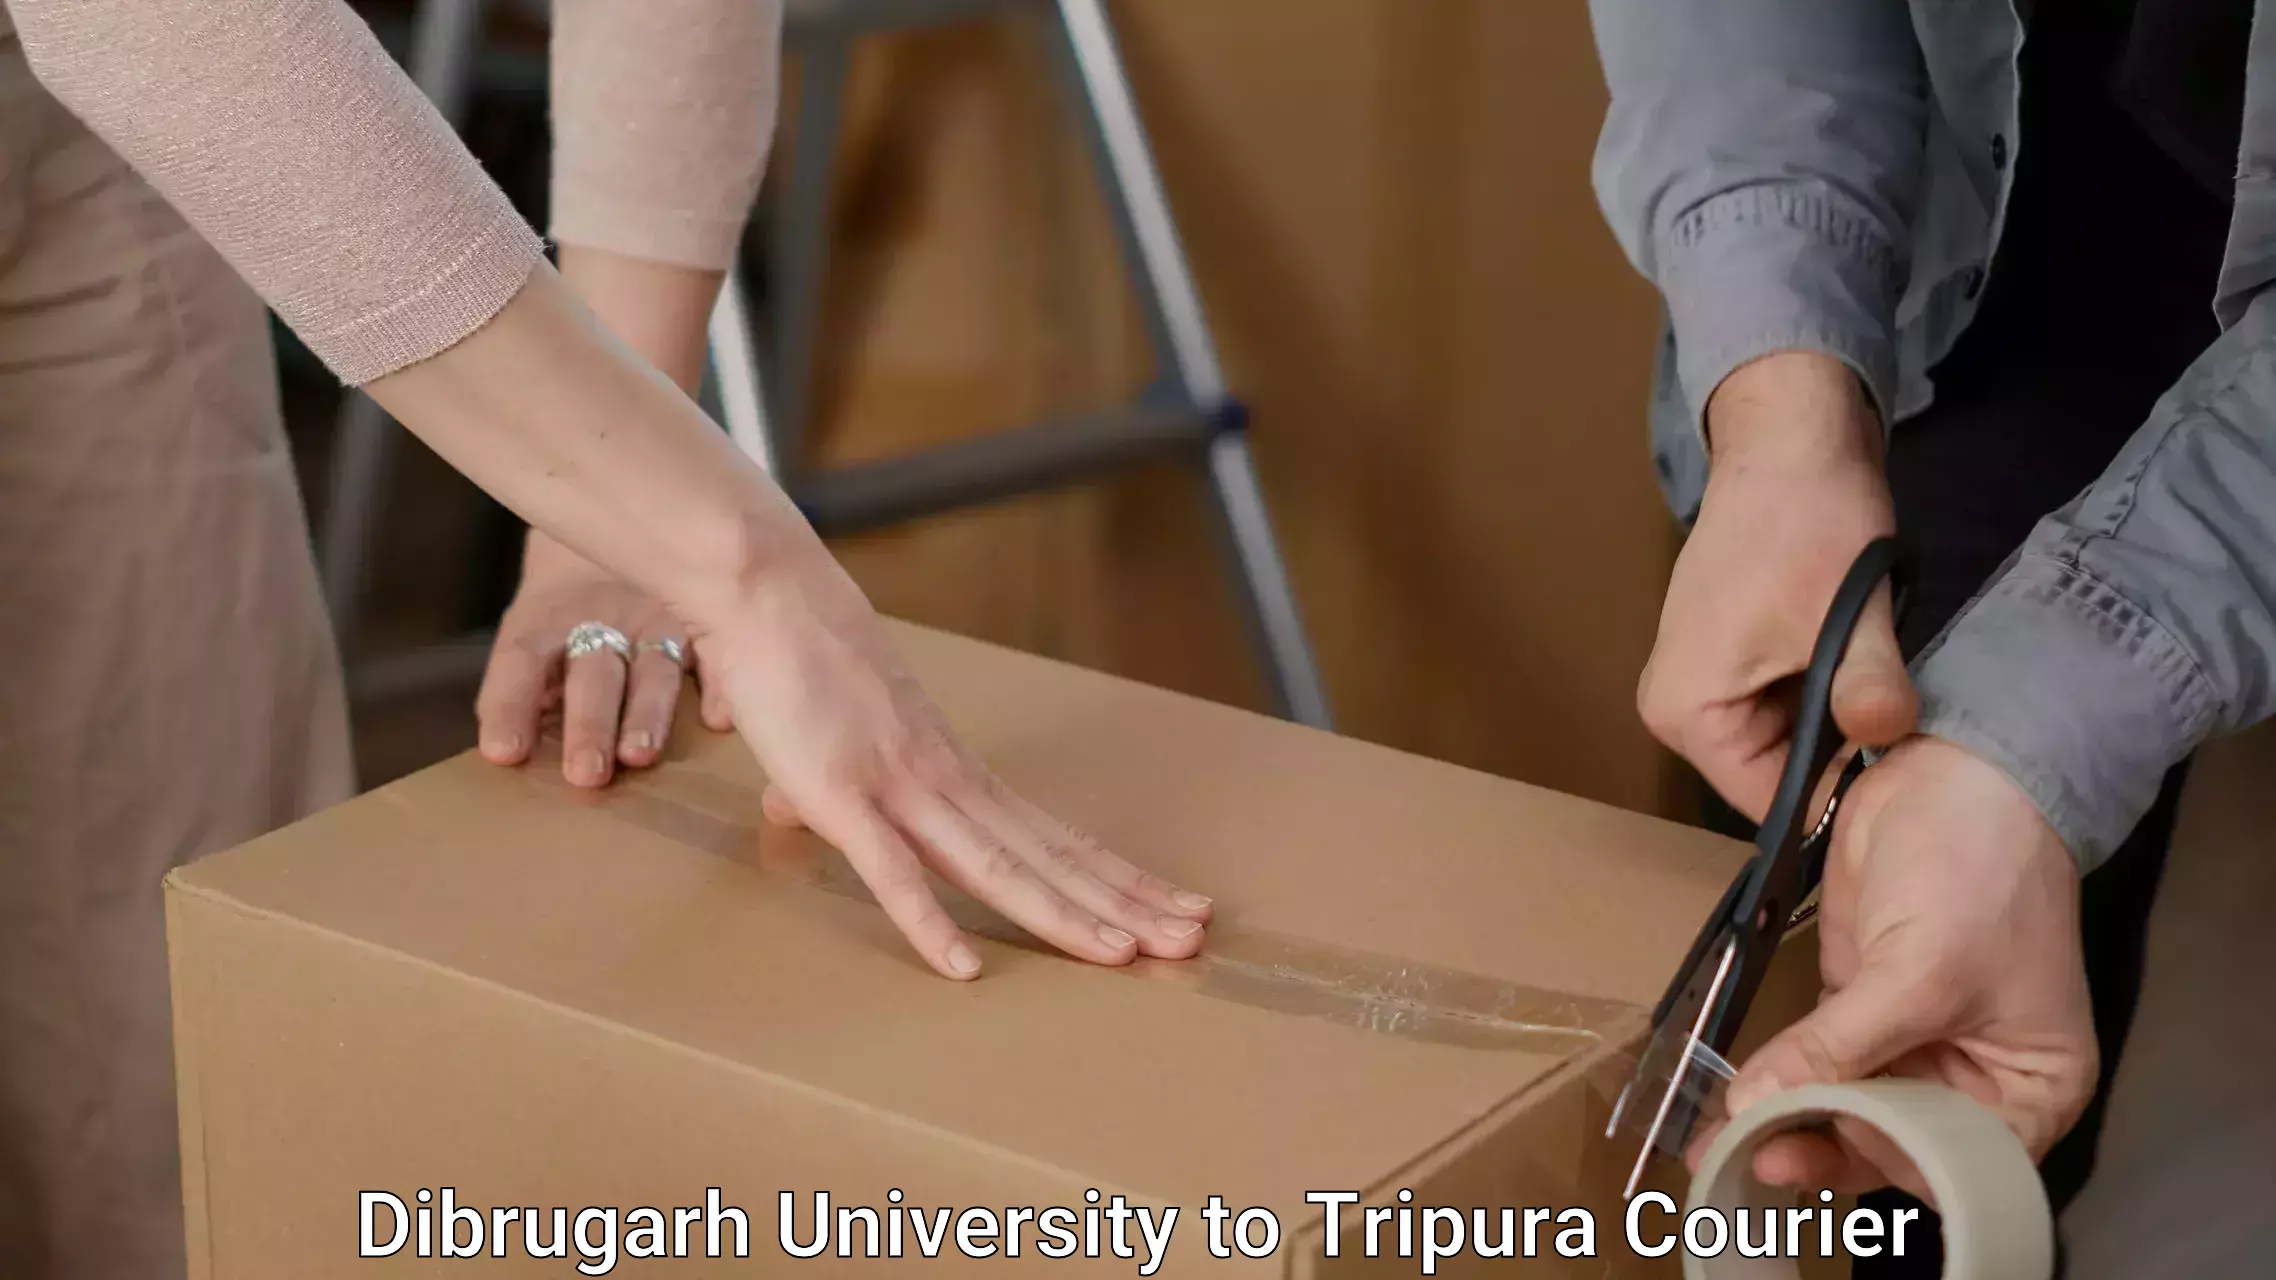 Furniture movers and packers Dibrugarh University to Udaipur Tripura